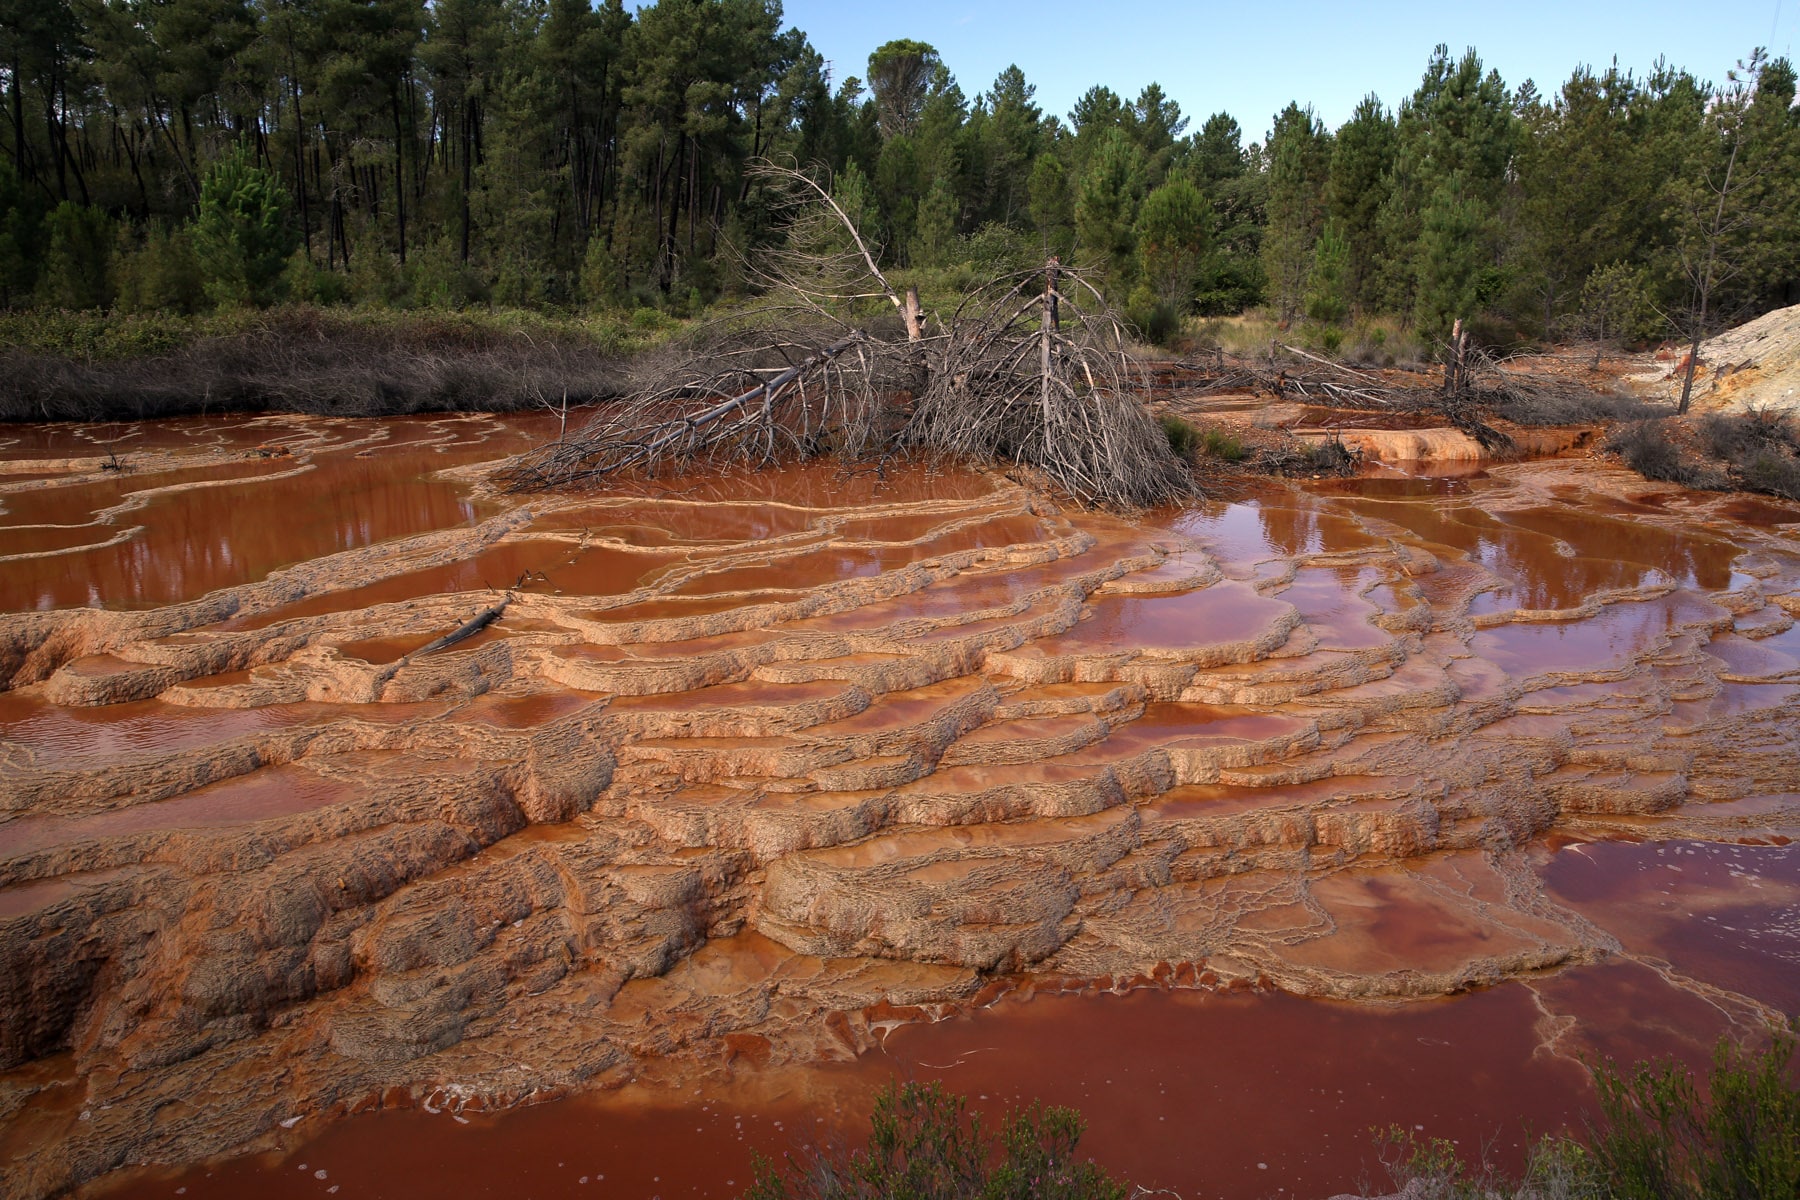 Acid mine drainage in the Tintillo river,downstream from the Atalaya open pit